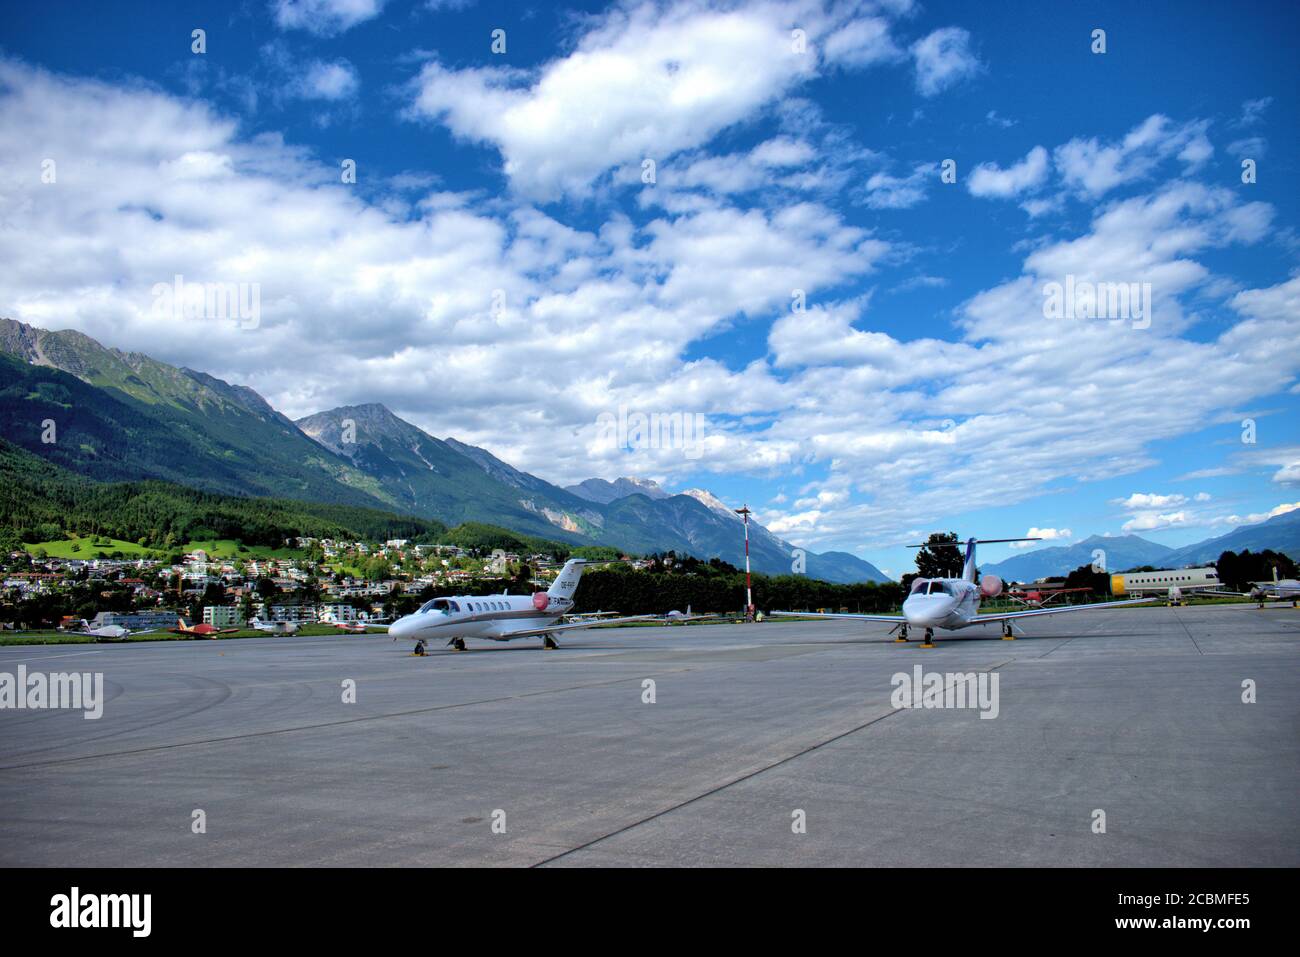 Business jets at the Innsbruck international airport Stock Photo